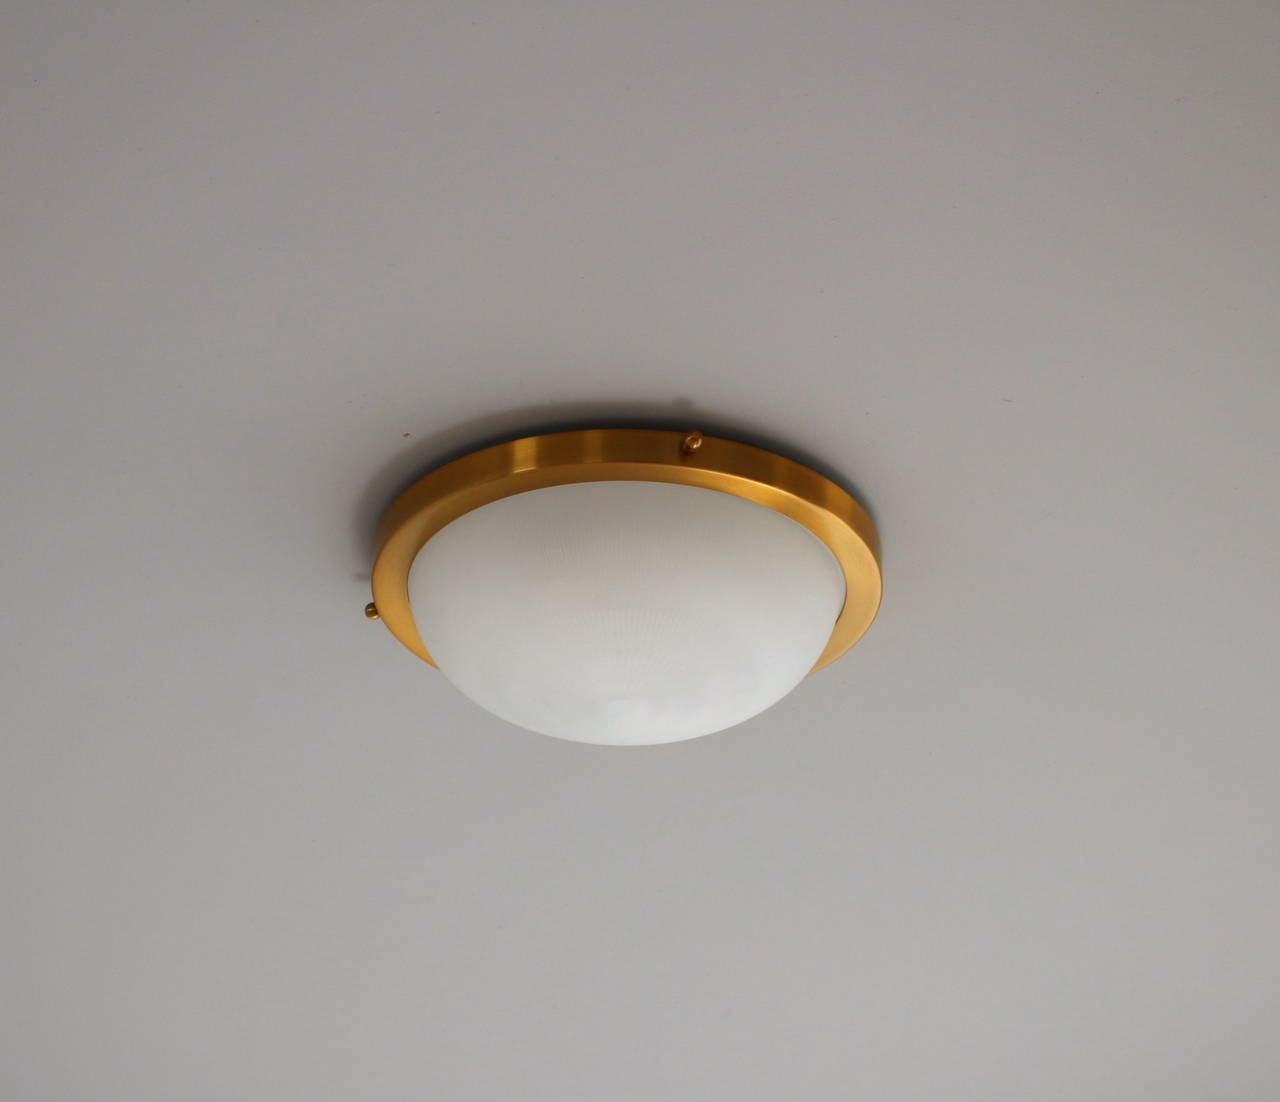 French Art Deco round brushed brass and fluted frosted glass flush mount fixture by Perzel.
Model 539 E.